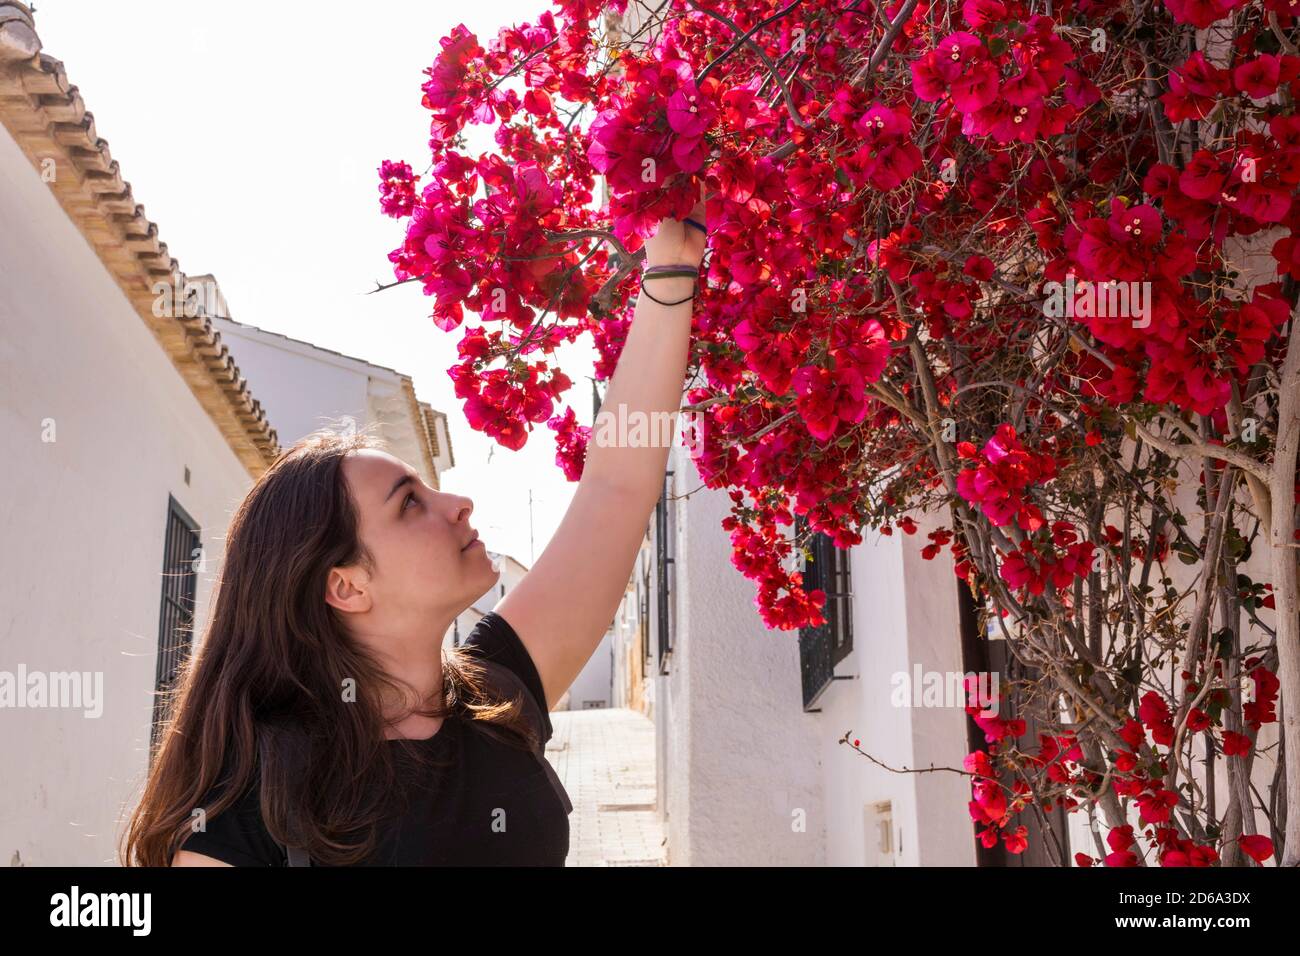 hiking woman observing and picking flowers (bougainvillea) through the streets of Altea (Alicante, Spain). Stock Photo